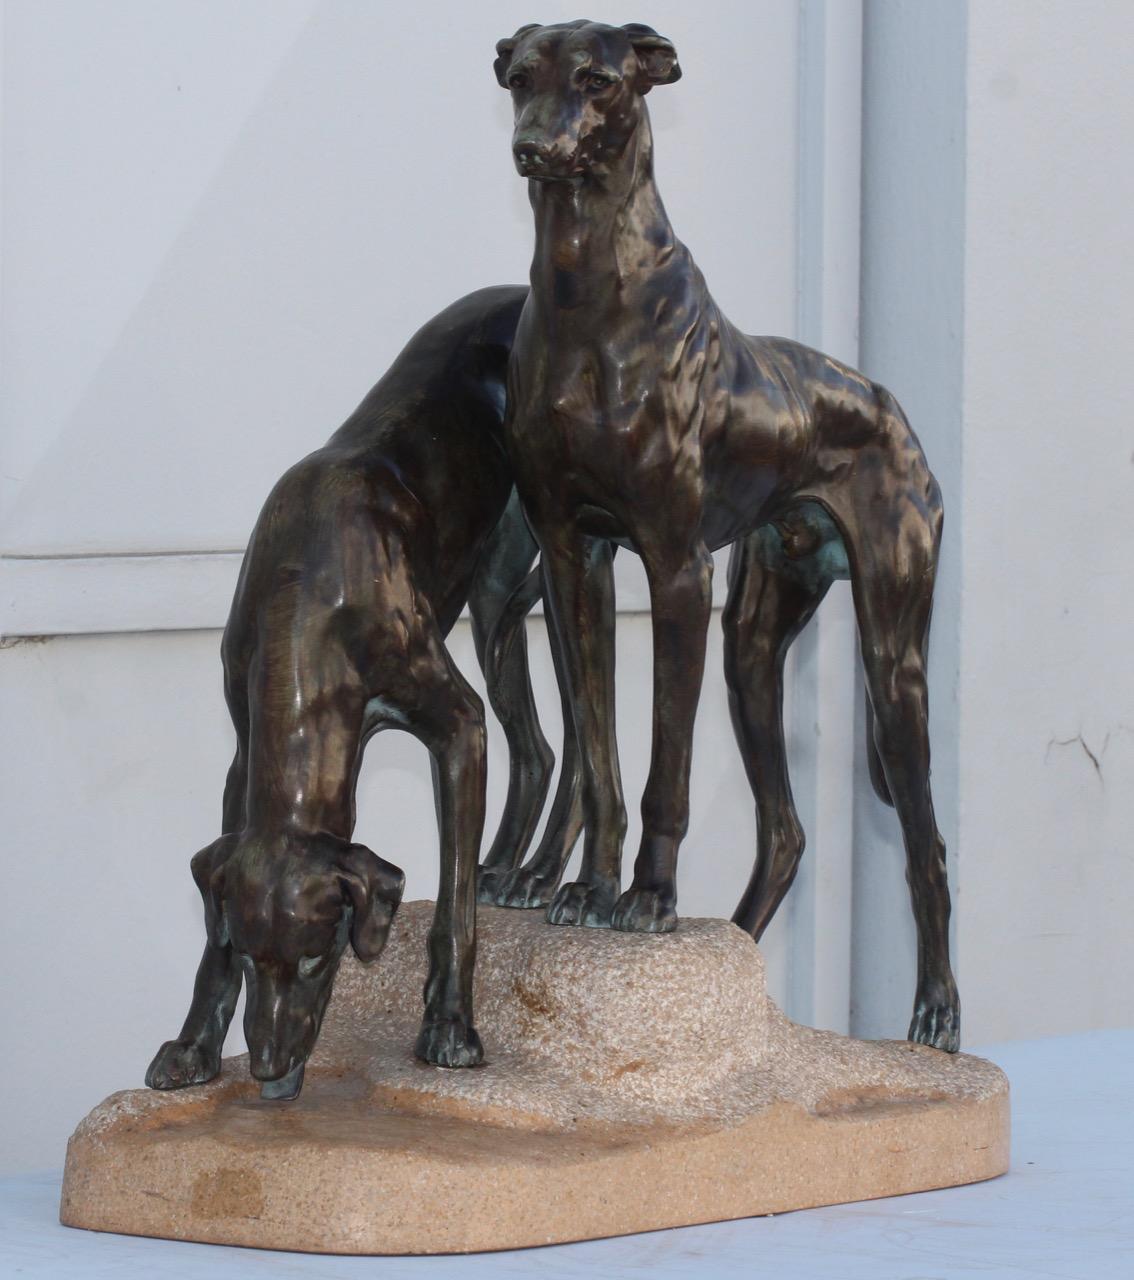 French Art Deco Sculpture Greyhounds by Jules Edmond Masson for Max Le Verrier, France